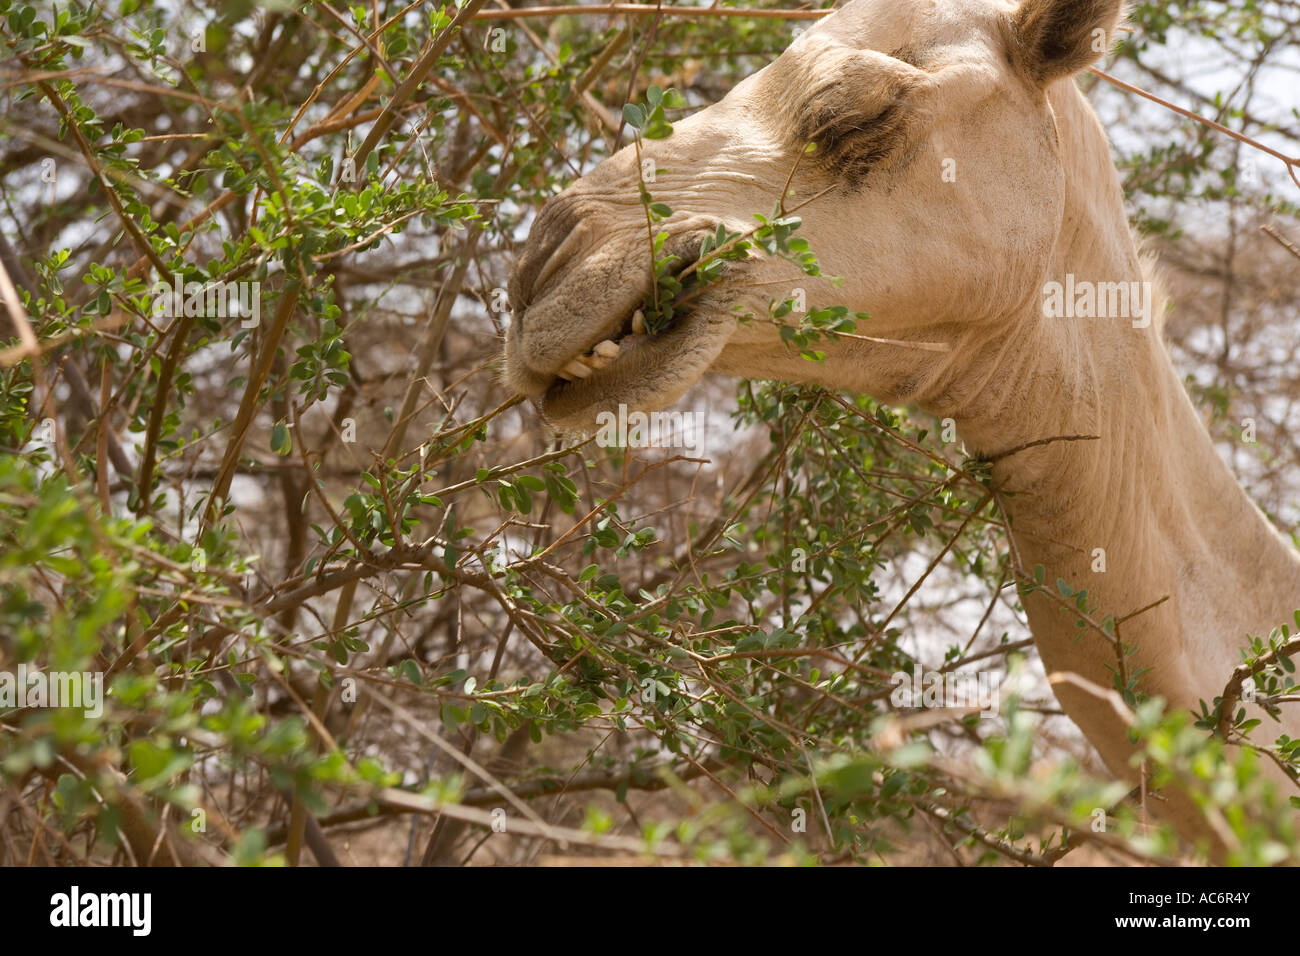 WESTERN SOMALIA 27th FEB 2006 A thin camel uses its nimble lips to eat the leaves off a thorny acasia tree Stock Photo